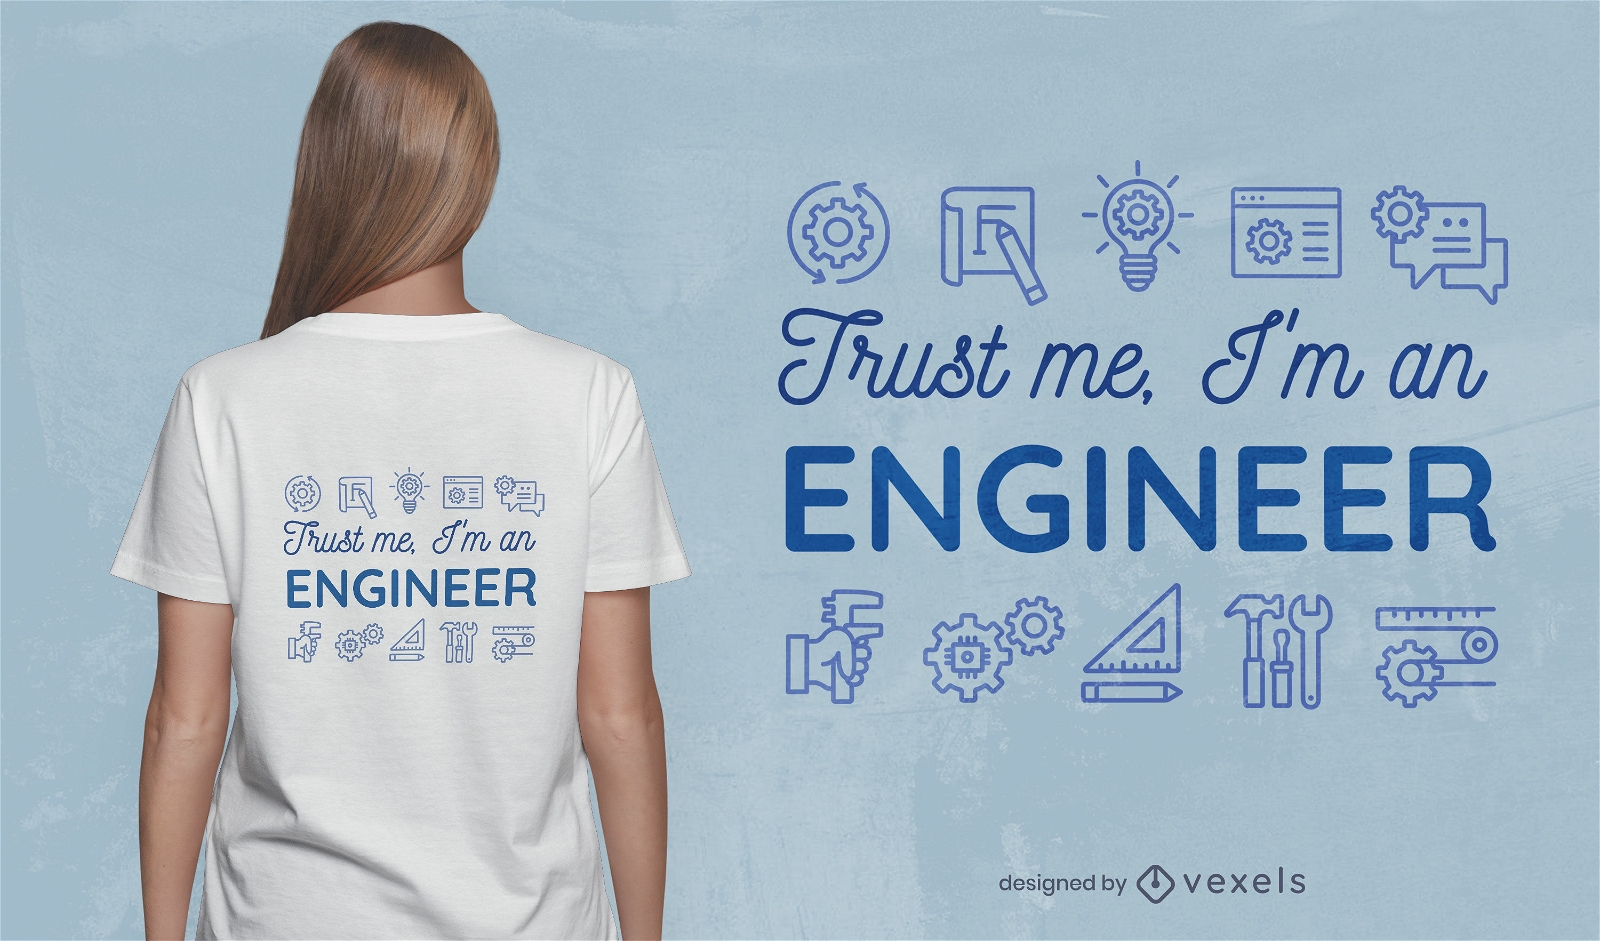 Engineer quote and elements t-shirt design